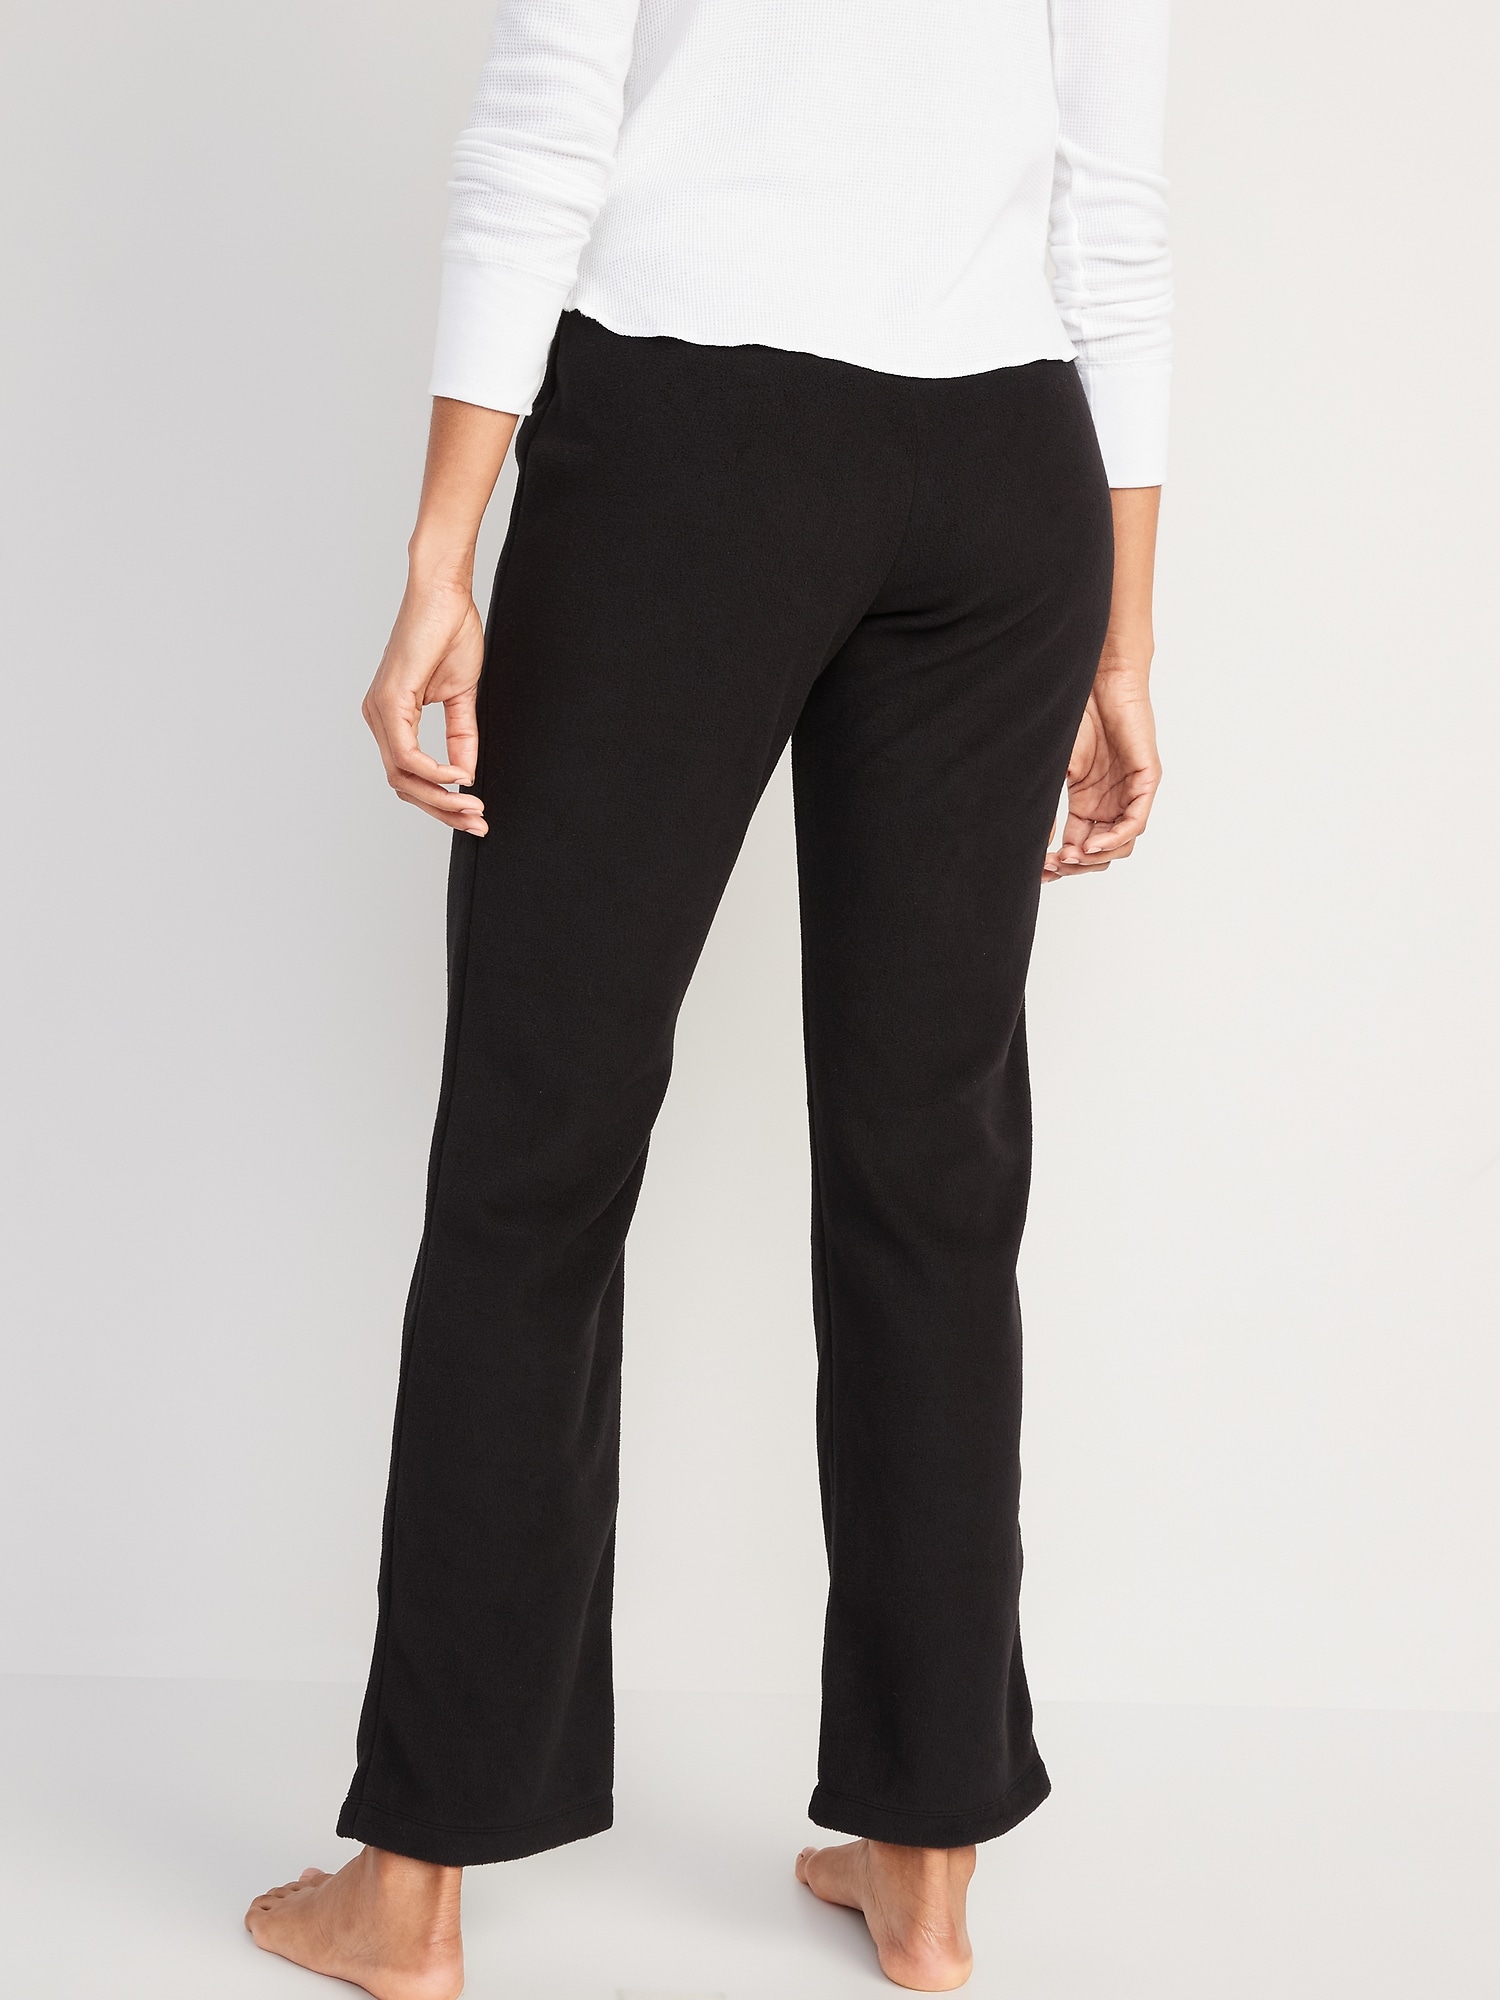 Mid-Rise Microfleece Pajama Pants for Women | Old Navy